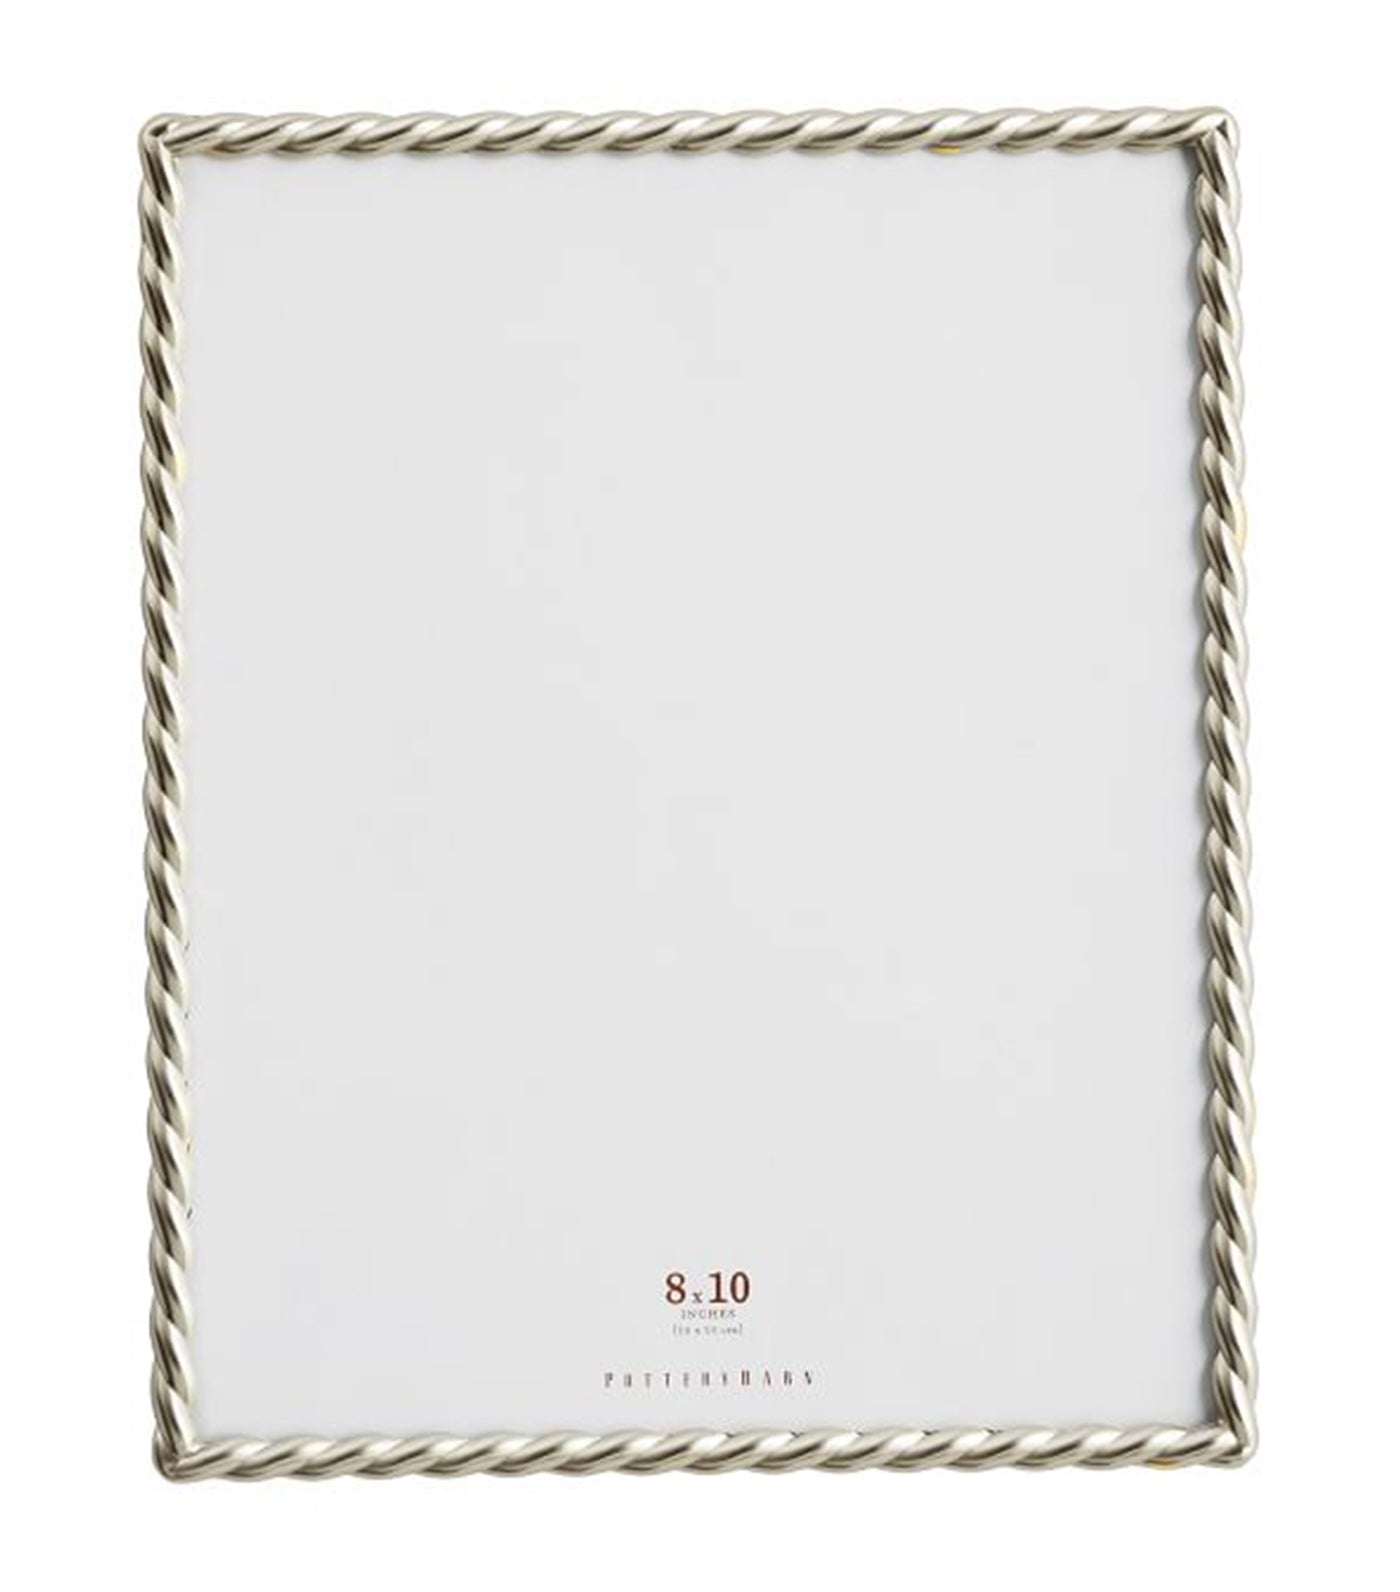 Pottery Barn Metal Rope Picture Frame - Silver